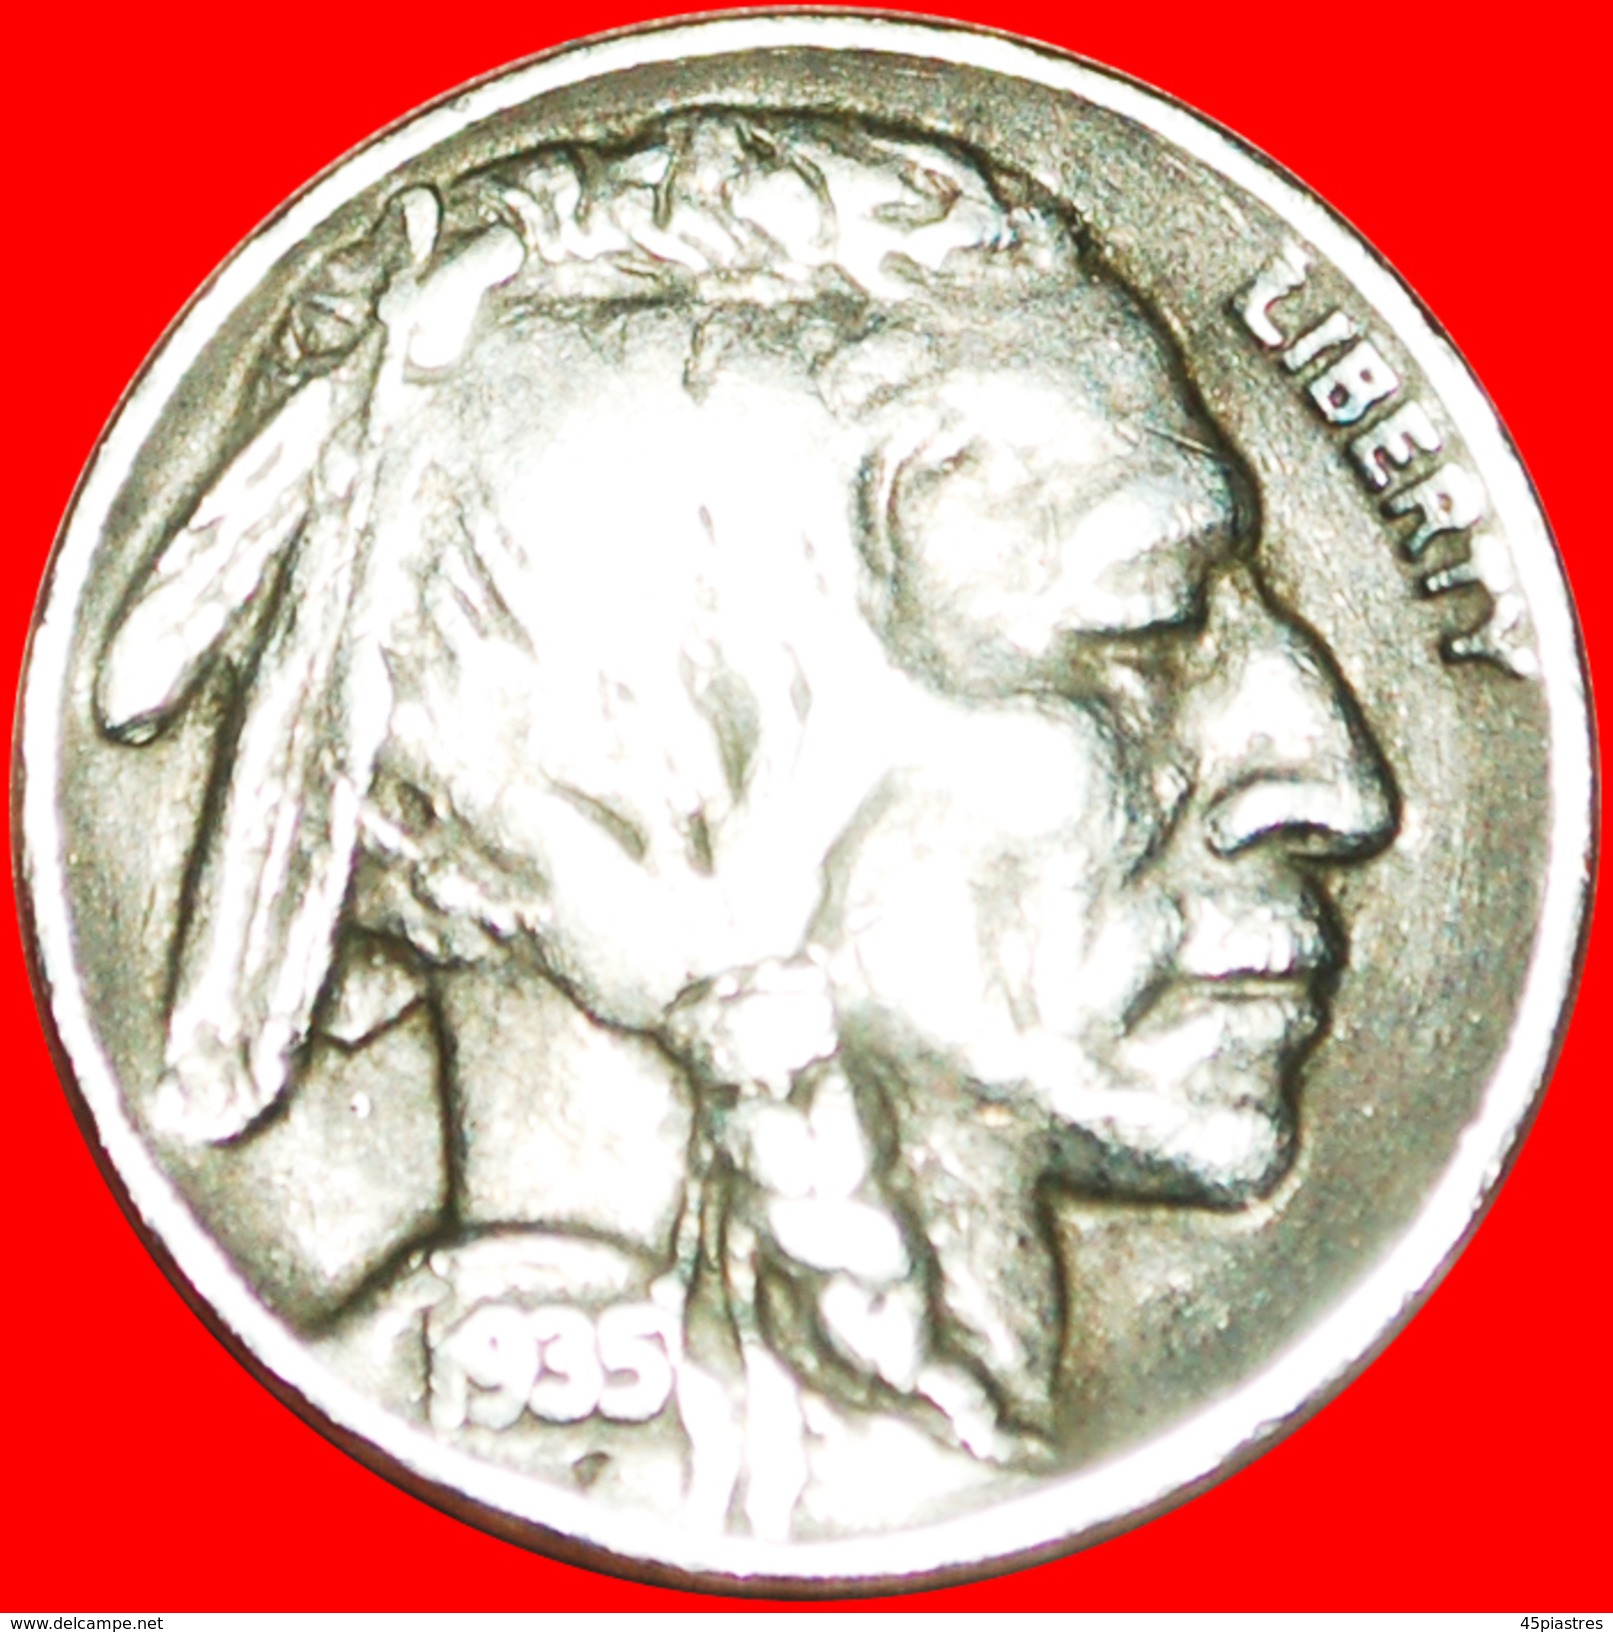 § INDIAN HEAD: USA &#x2605; 5 CENTS 1935D! LOW START&#x2605; NO RESERVE! - 1913-1938: Buffalo